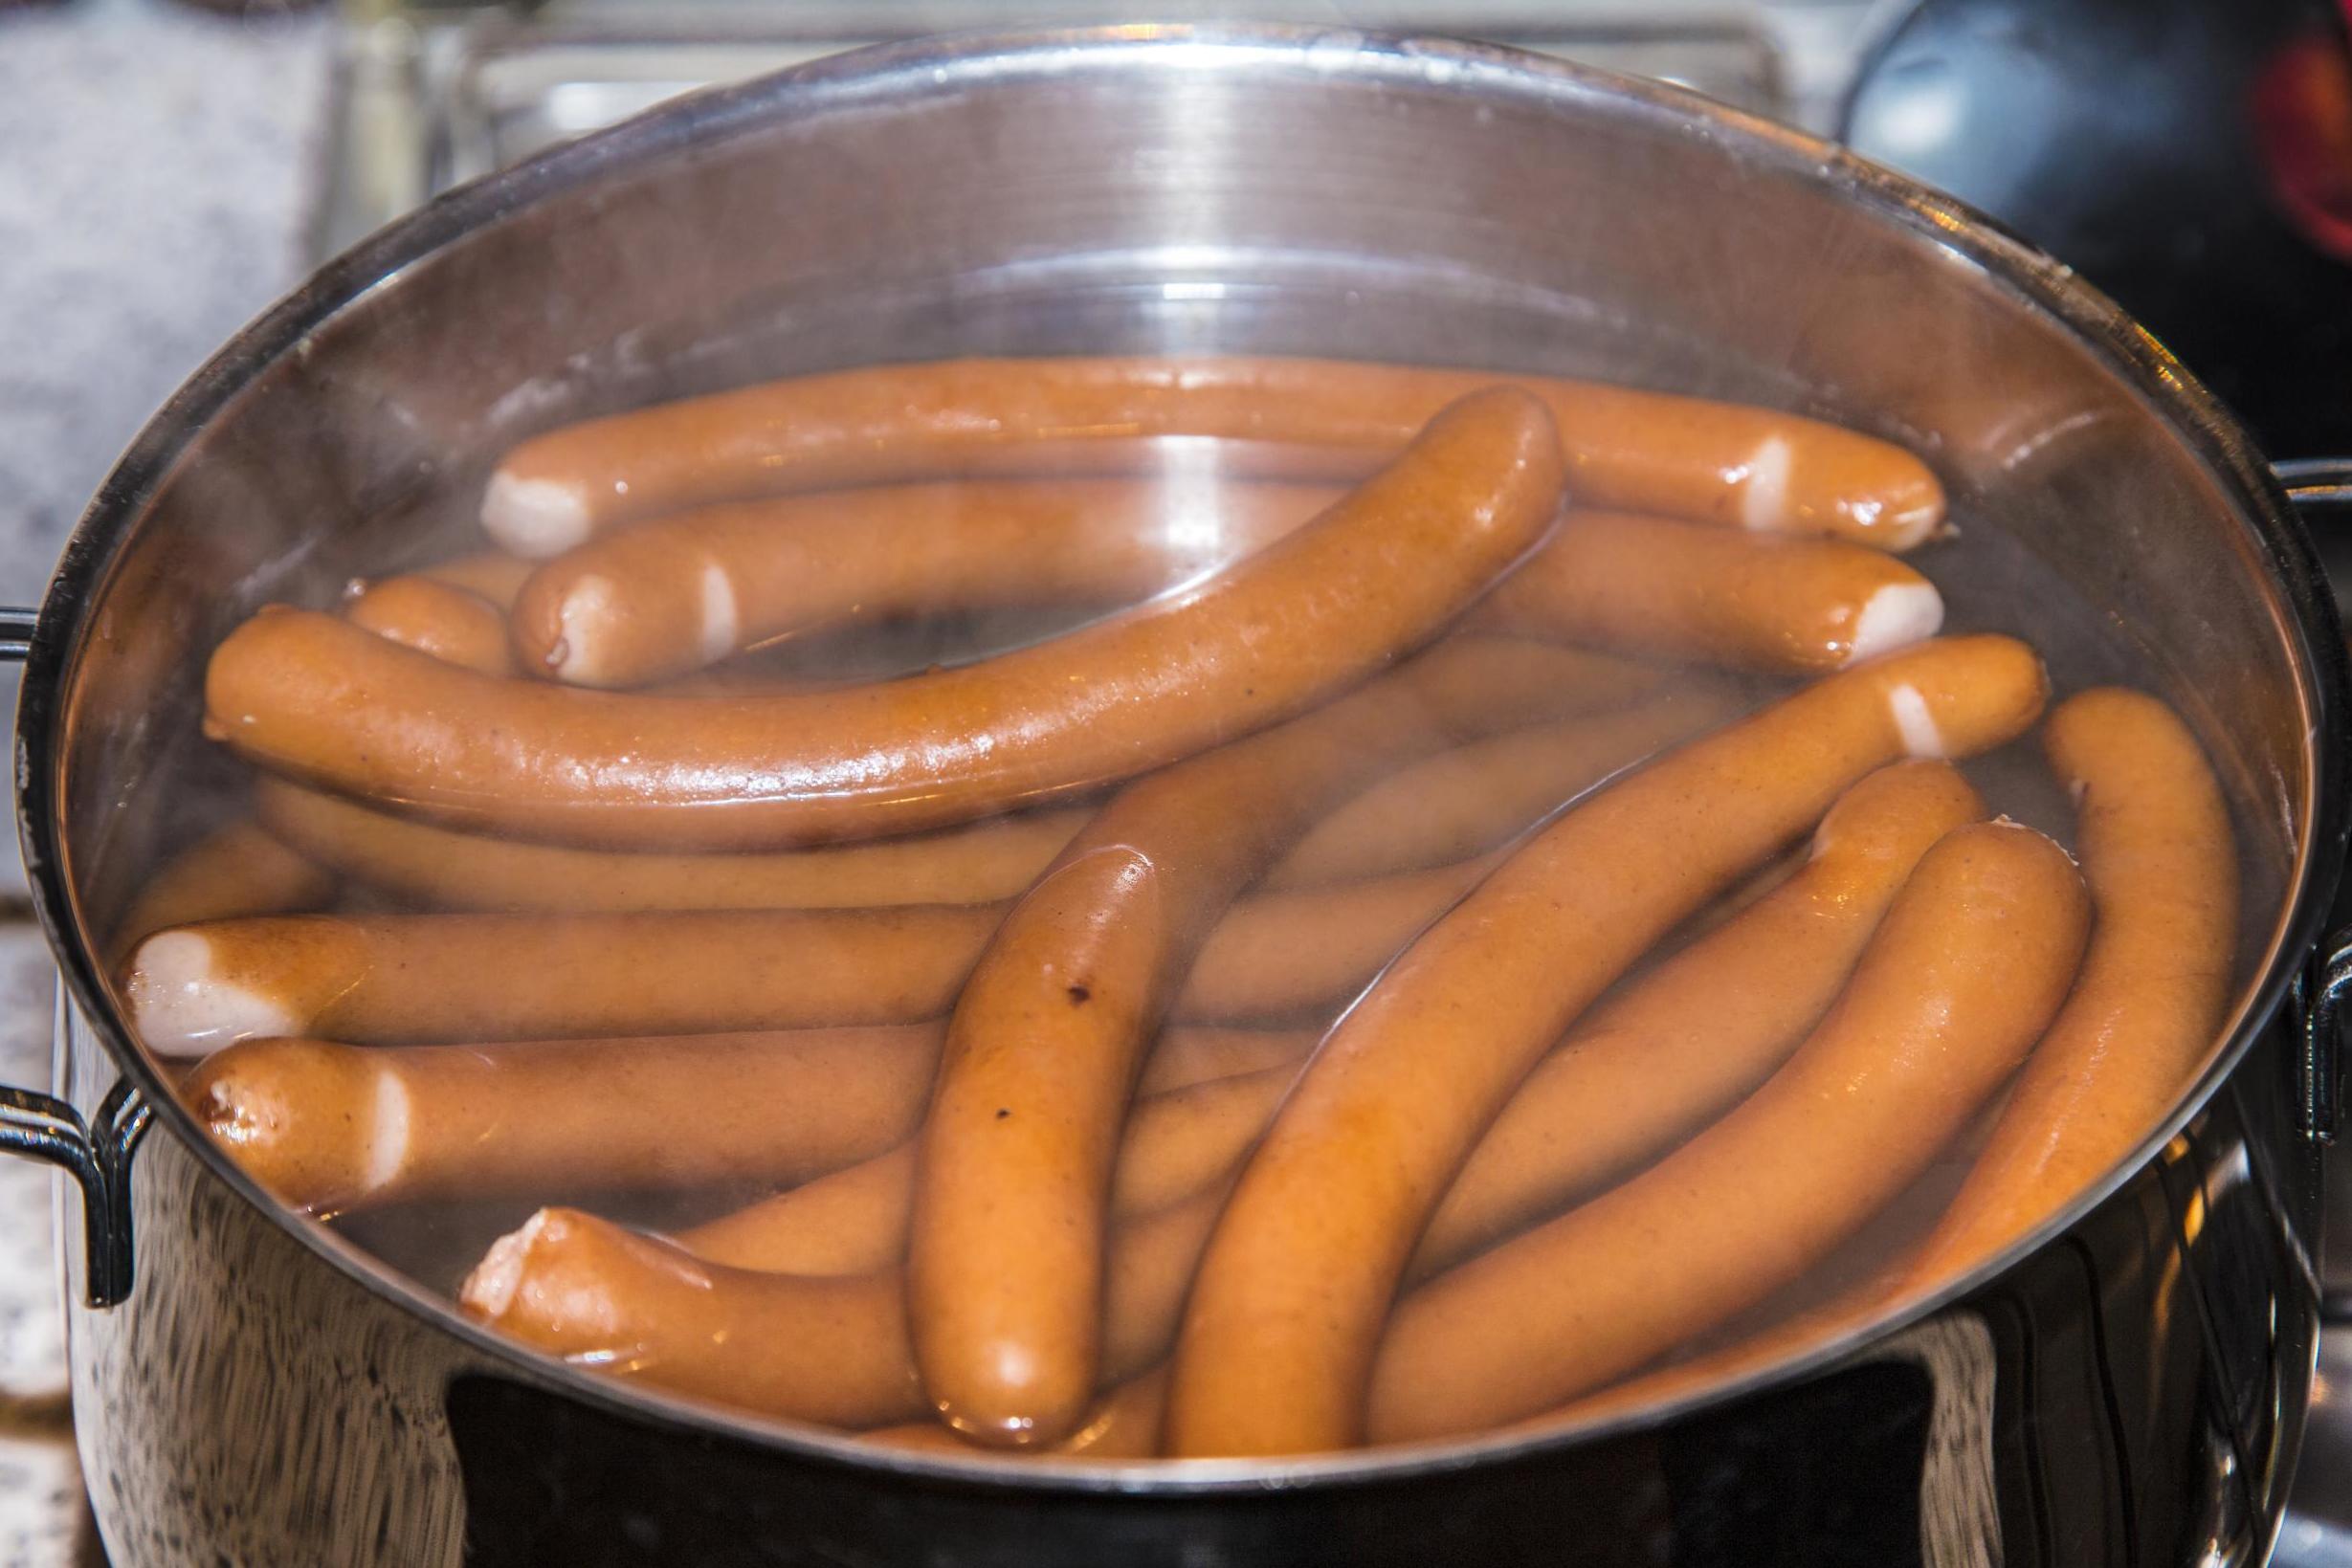 Stunt convinced people to buy unfiltered hot dog water for weight loss (Stock)